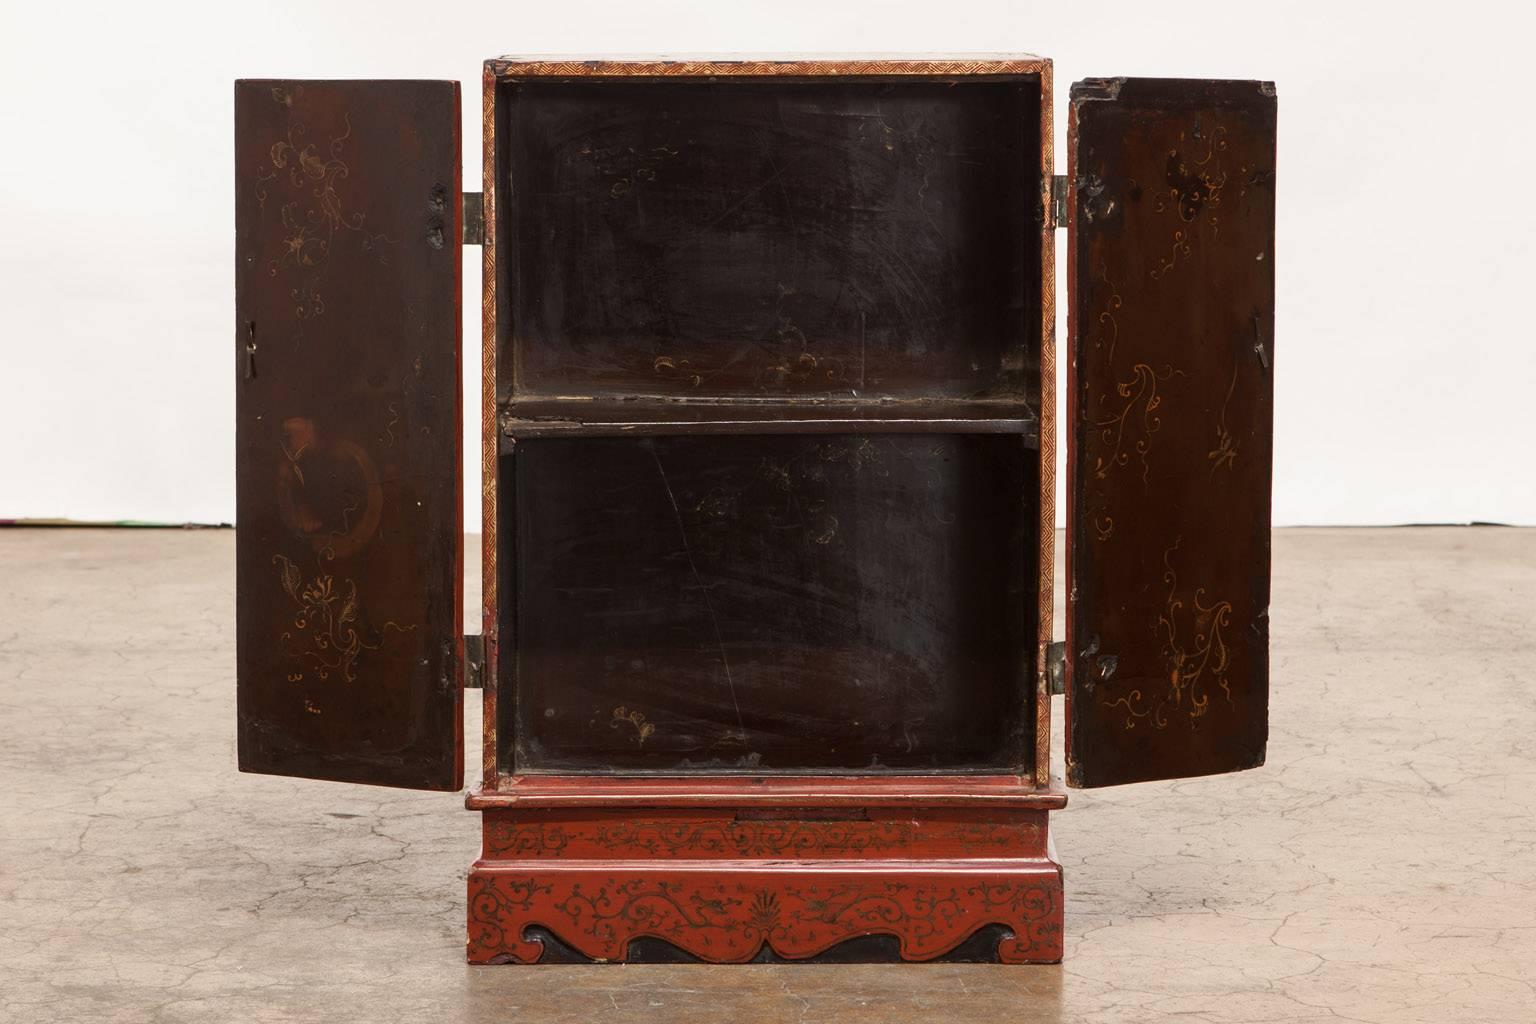 Remarkable pair of matching diminutive Japanese storage cabinets featuring a thick coromandel style lacquer base with finely painted idyllic scenes. Accented with gilt trim and brass hardware plates. Decorated on four sides and the interior, these